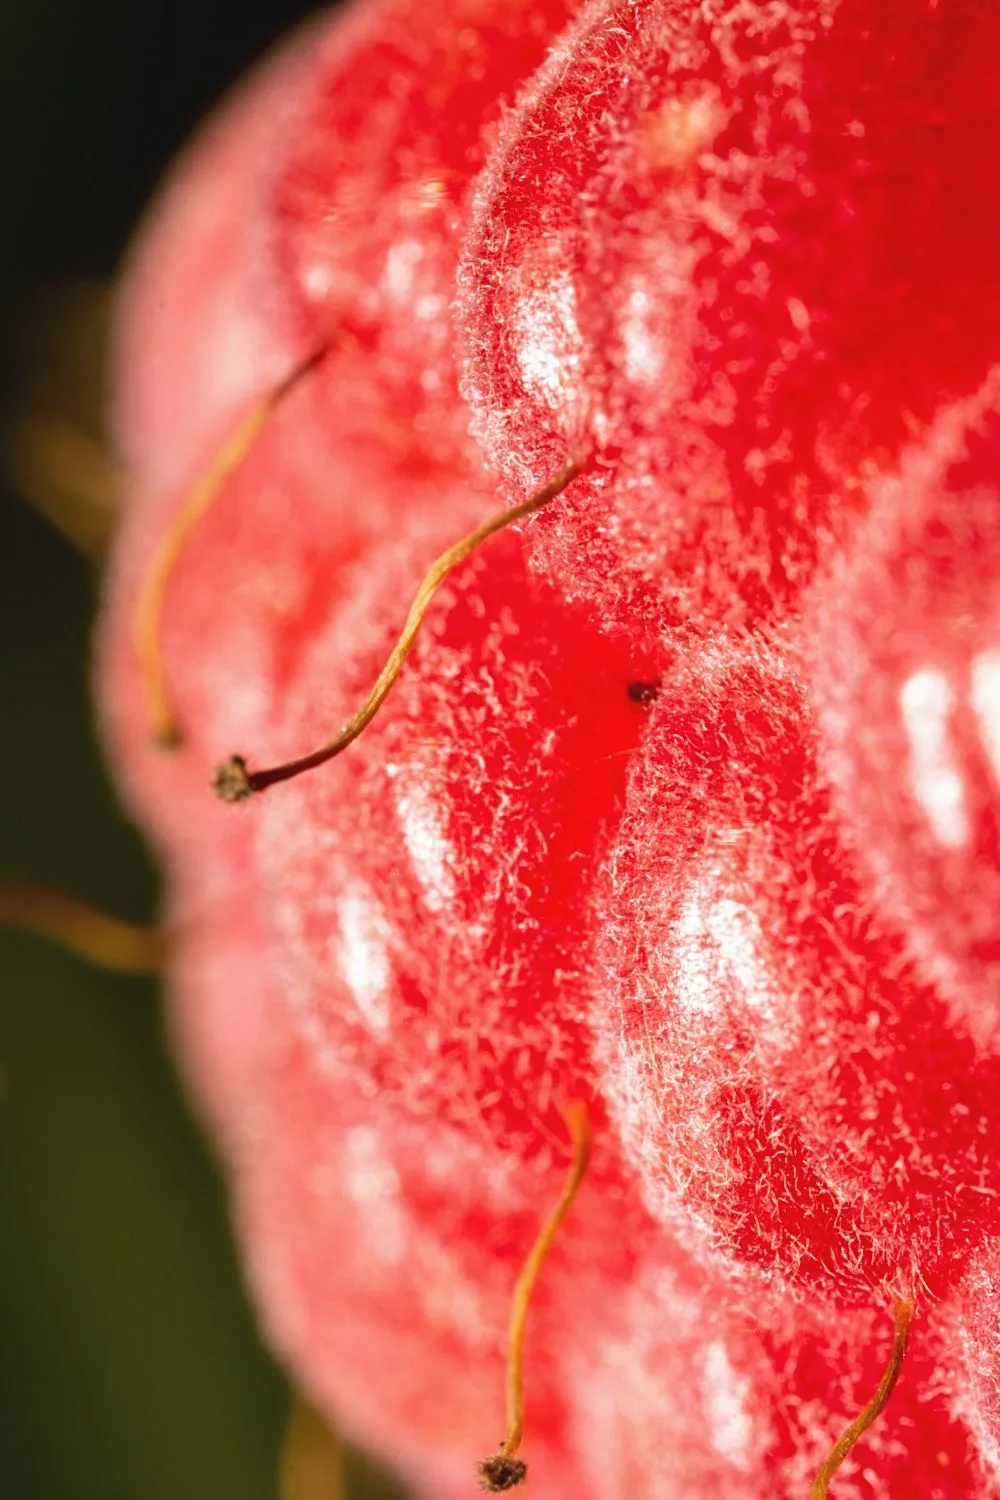 The hair found on the raspberry fruit serves to protect it from insect damage